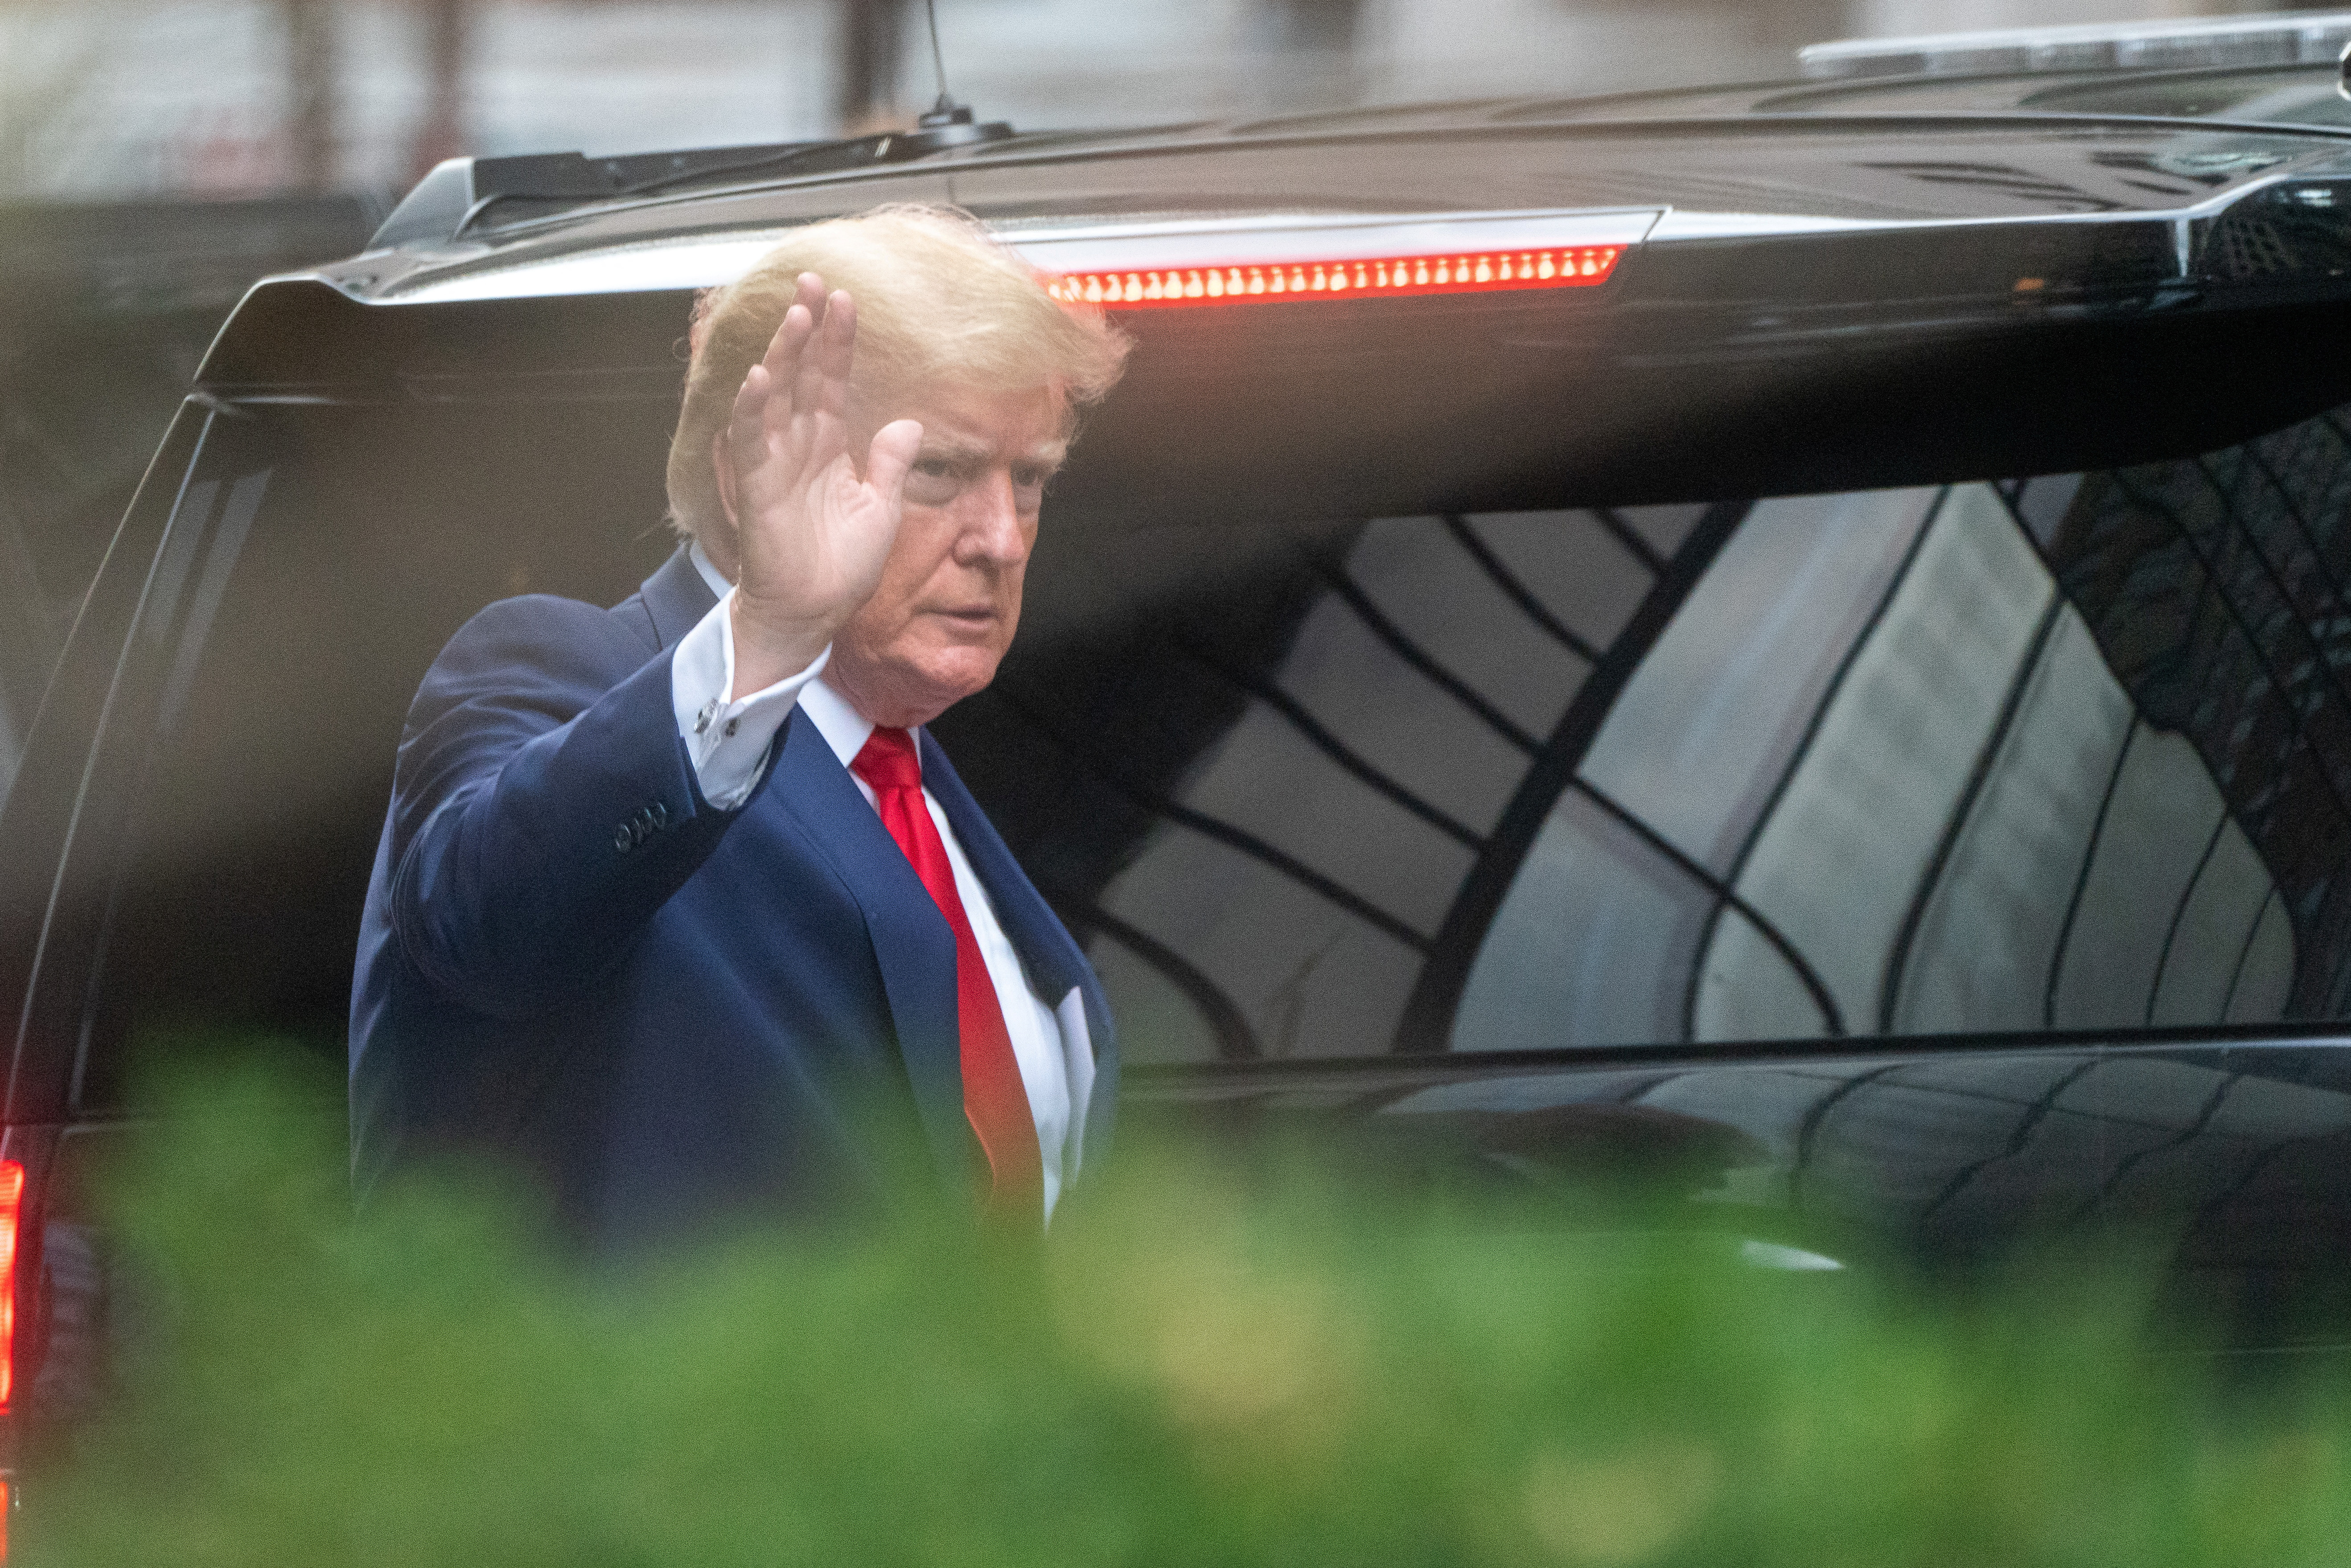 Donald Trump departs Trump Tower two days after FBI agents raided his Mar-a-Lago Palm Beach home, in New York City